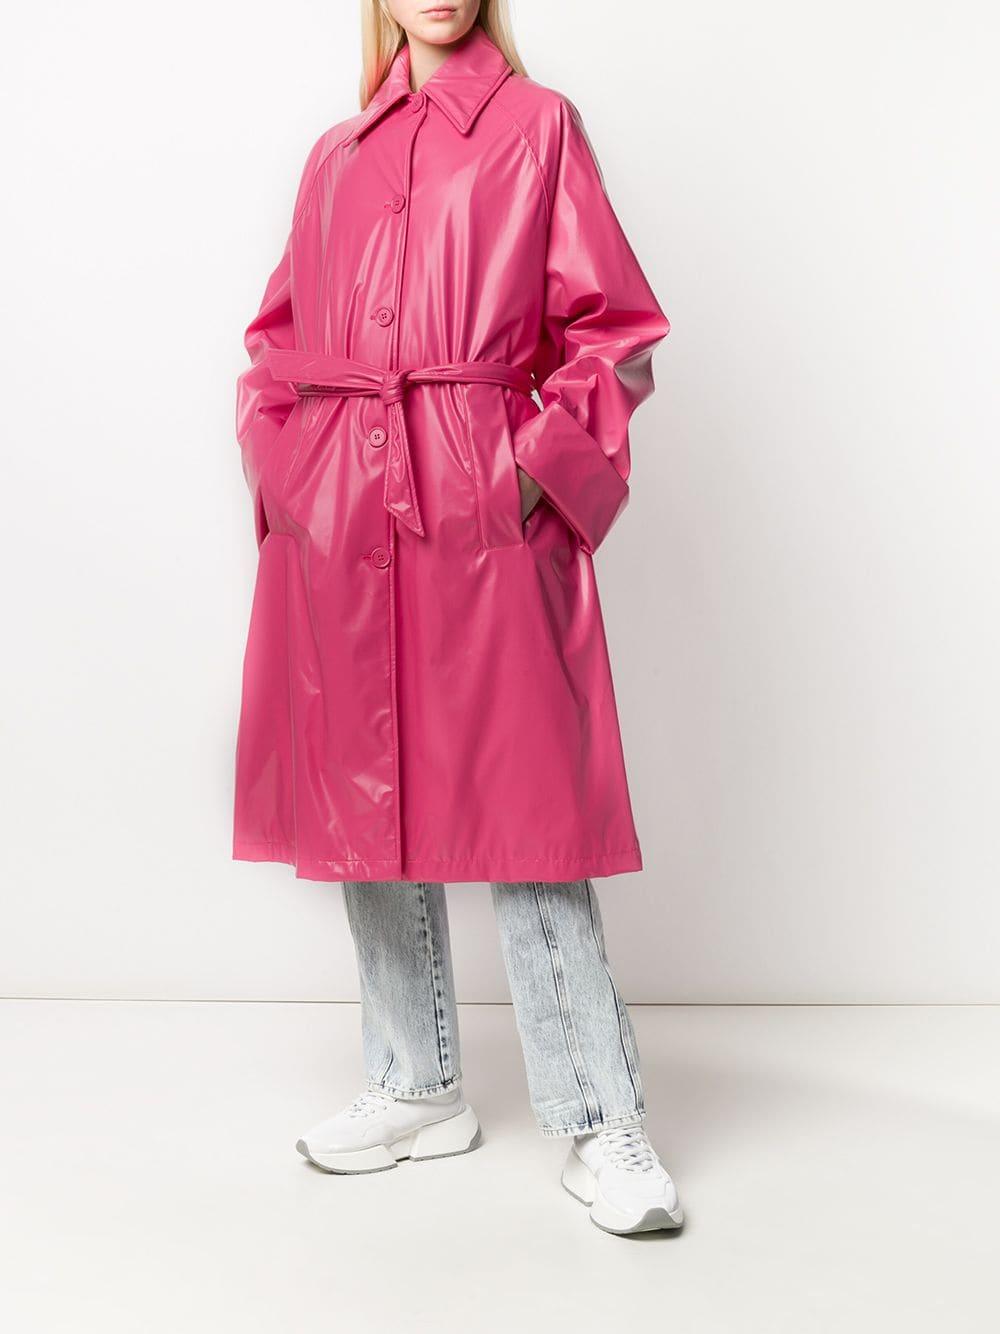 MM6 by Maison Martin Margiela Synthetic Trench Coat in Pink - Lyst